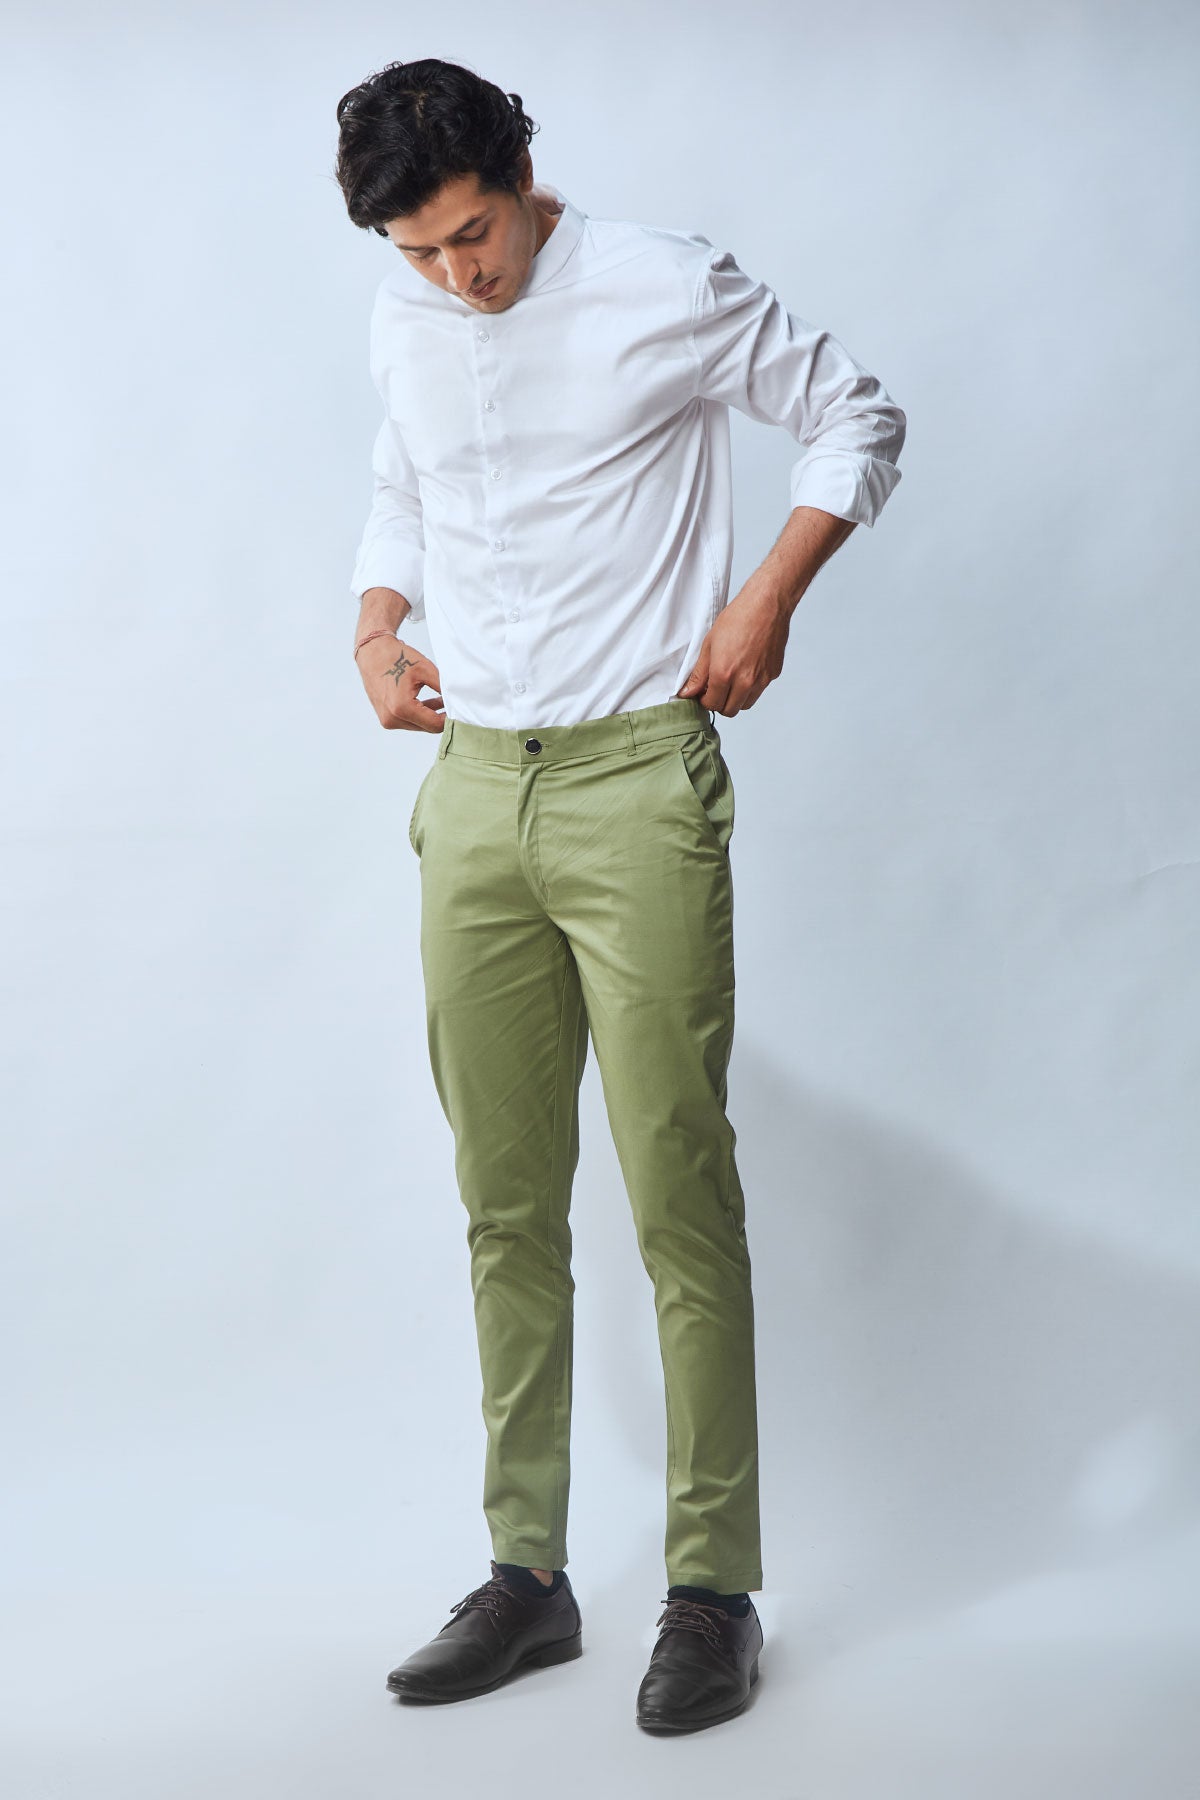 15 Olive Green Pant Outfit Ideas For Women (Comfy & Stylish)